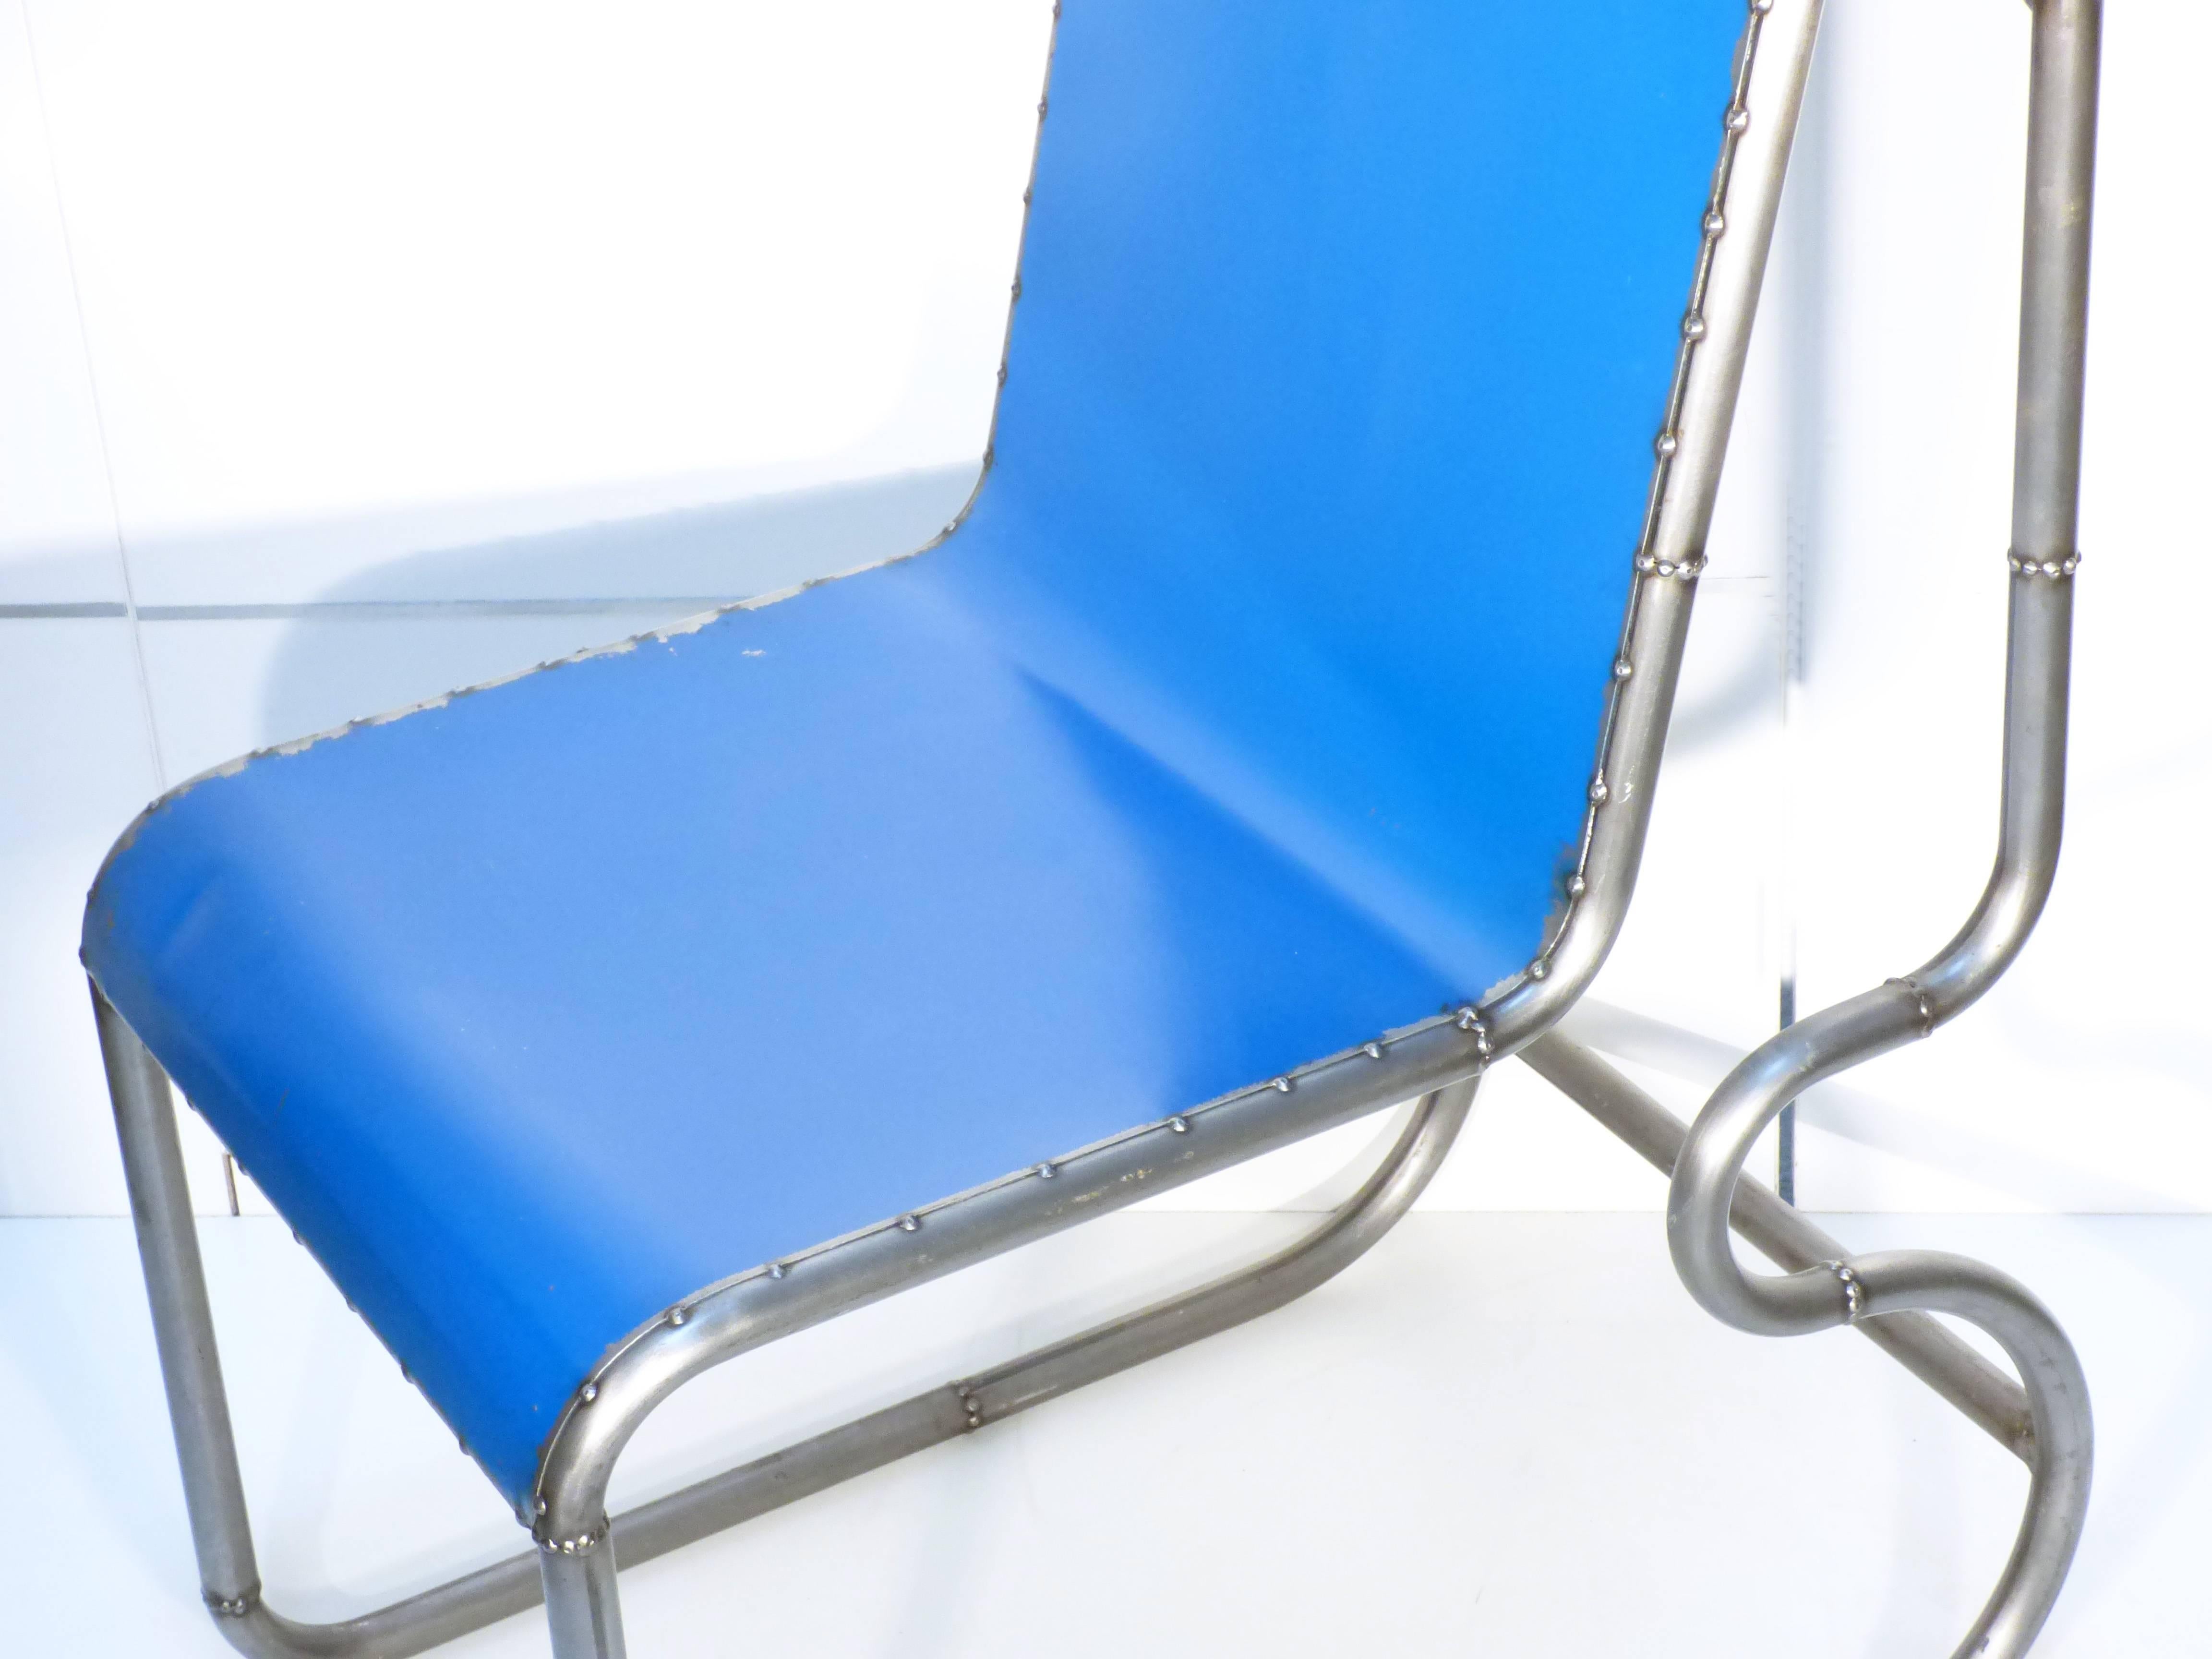 Welded American Reclaimed Steel Blue Chair in Industrial Design, Office or Desk Chair  For Sale